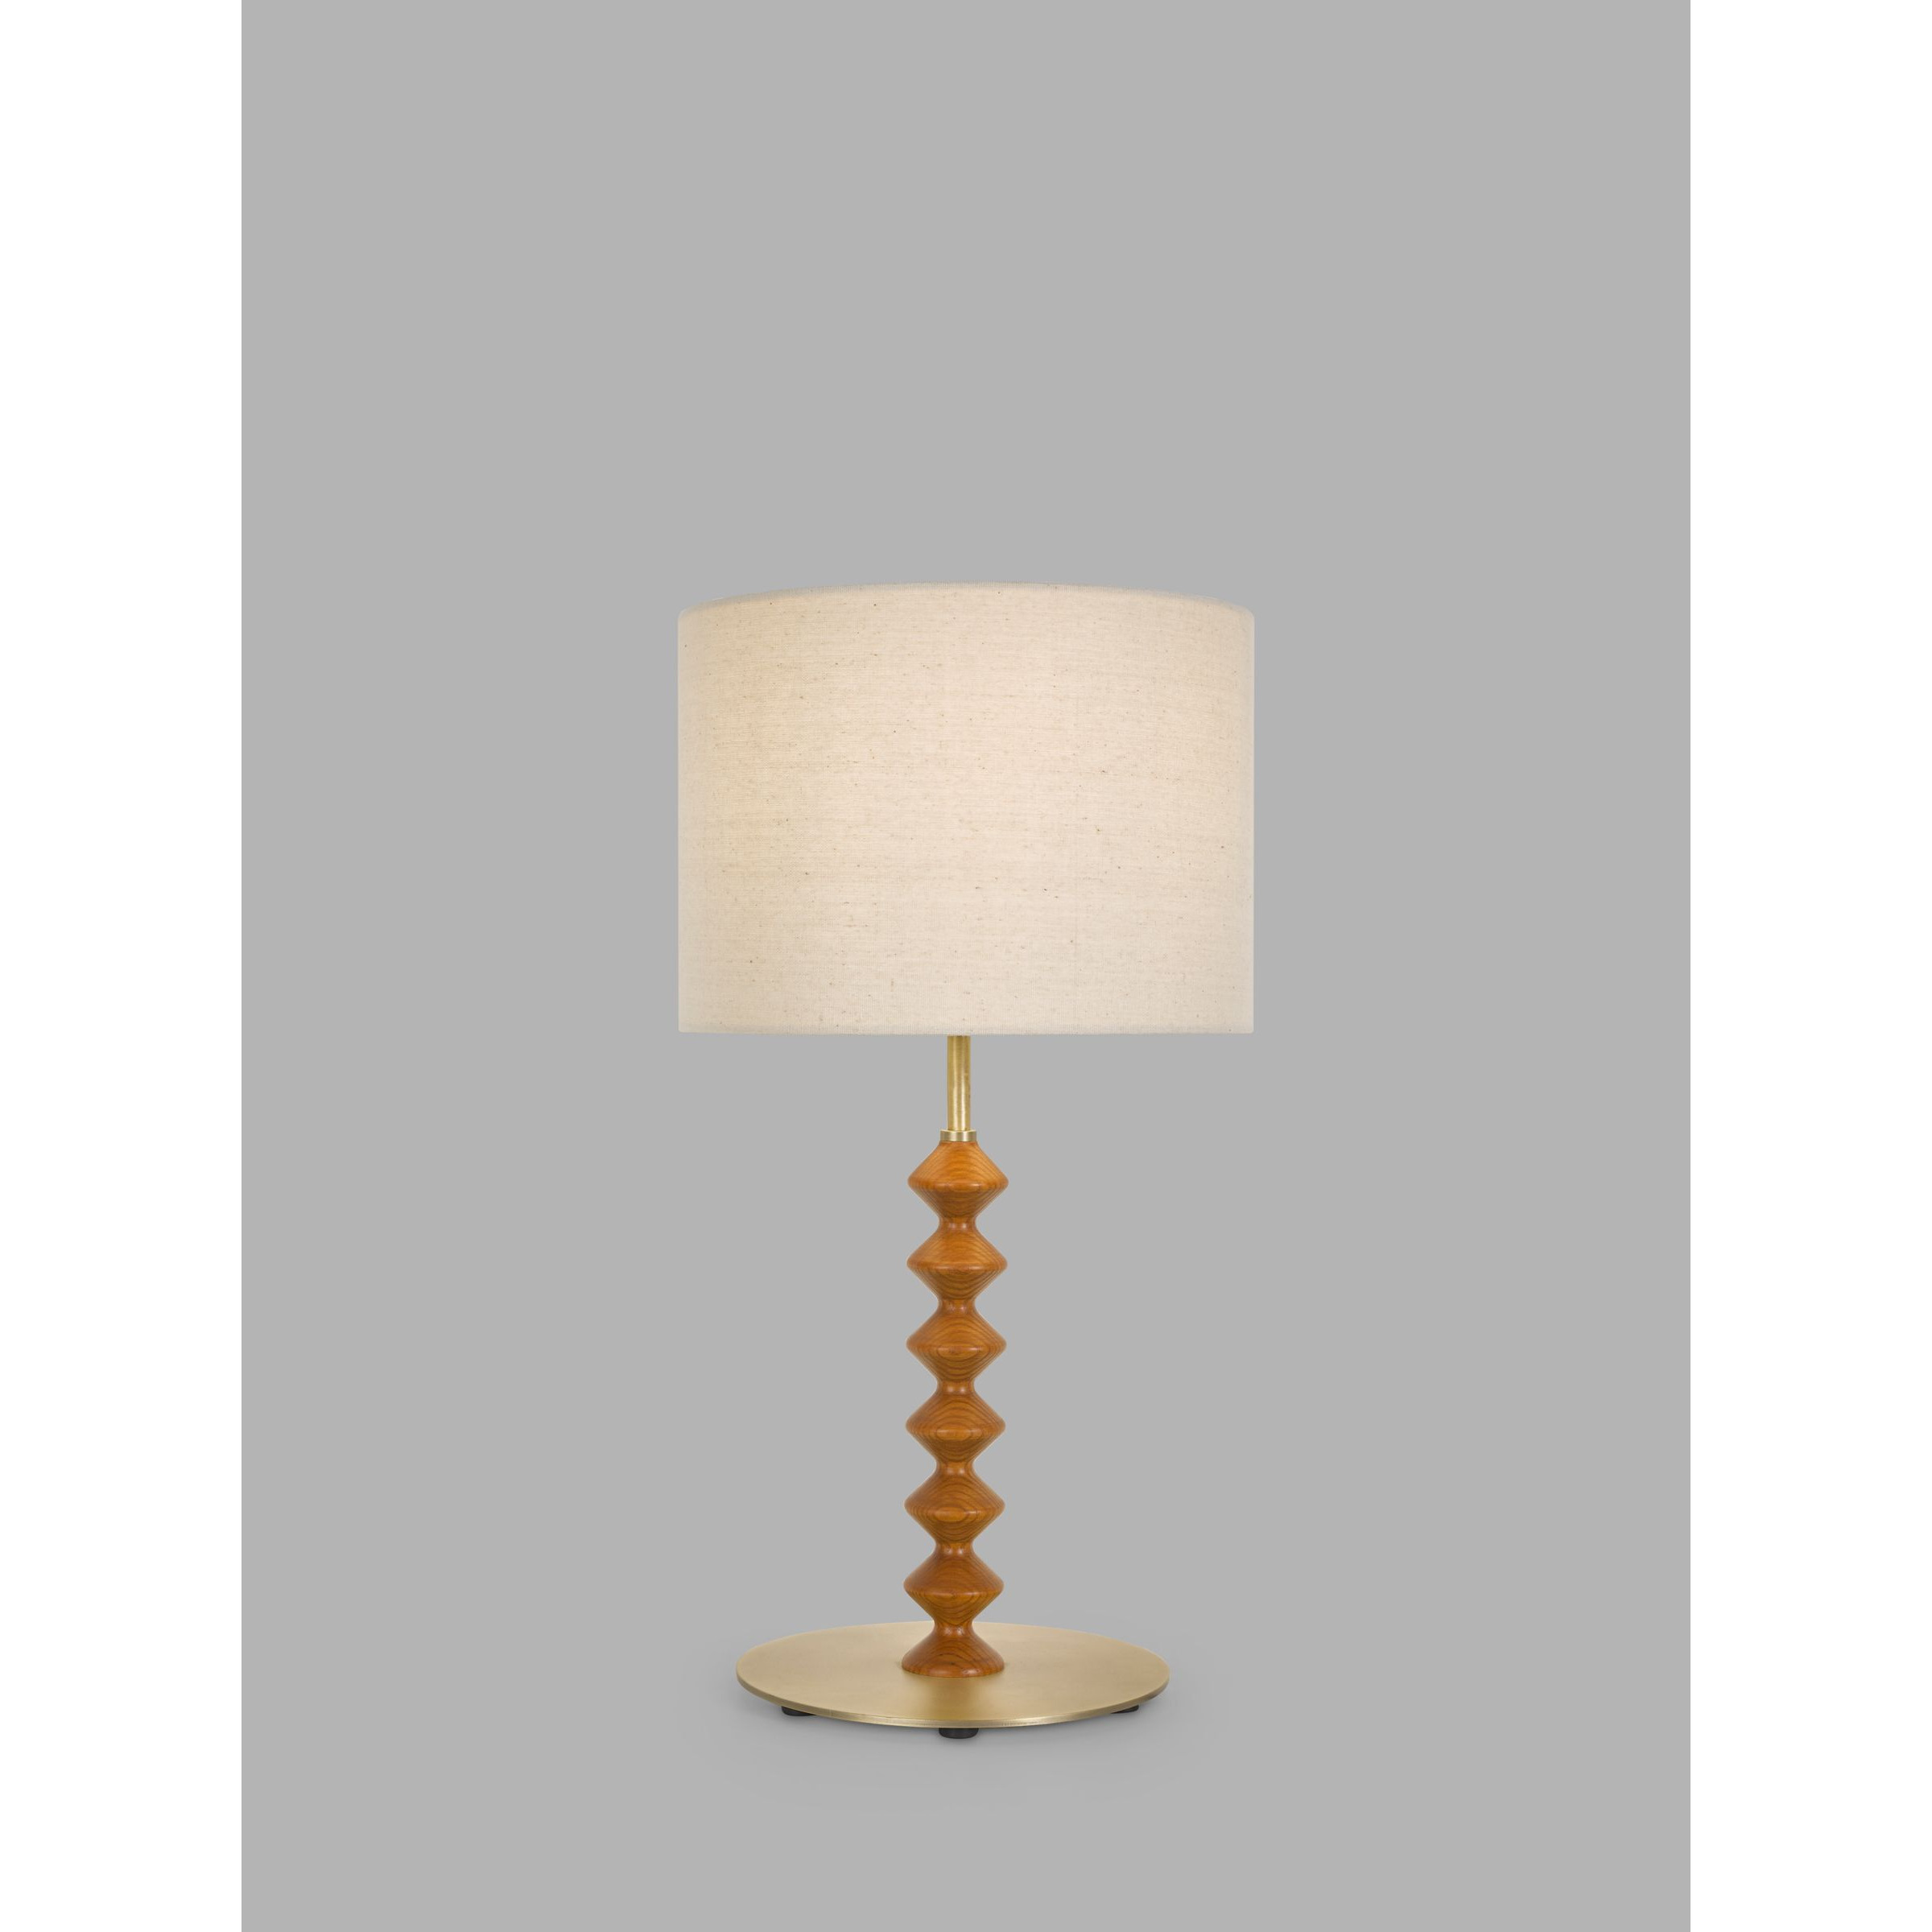 Swoon Franklin Table Lamp, Antique Brass/Walnut Stained Ash - image 1